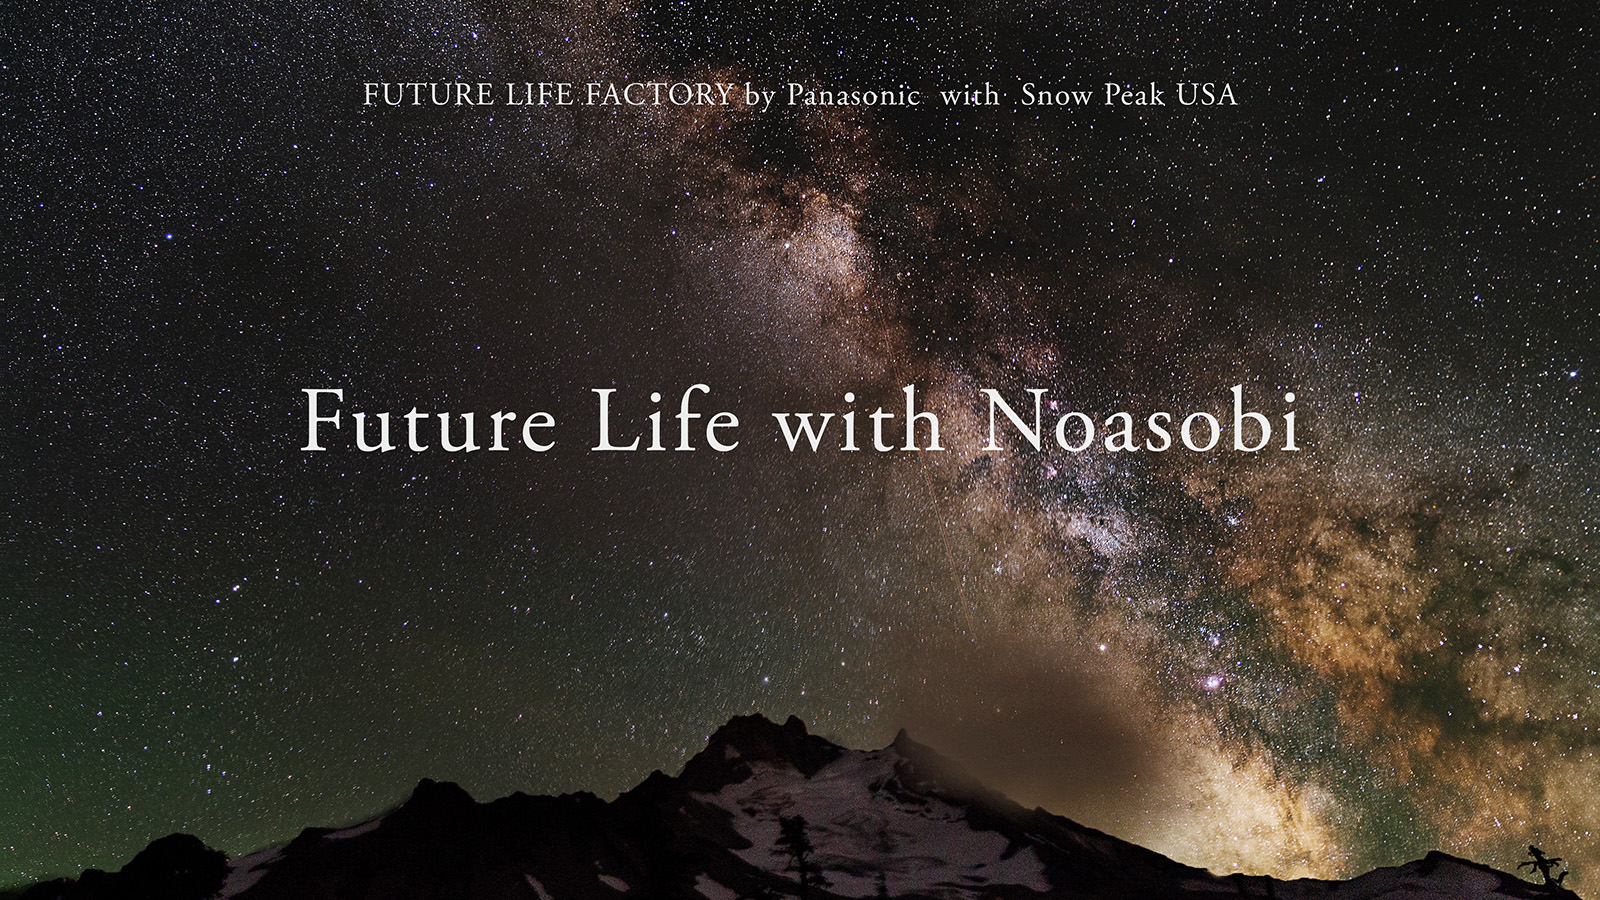 Panasonic and Snow Peak USA Partner to Reintegrate Nature into Our Lives |  Others | Products & Solutions | Blog Posts | Panasonic Newsroom Global